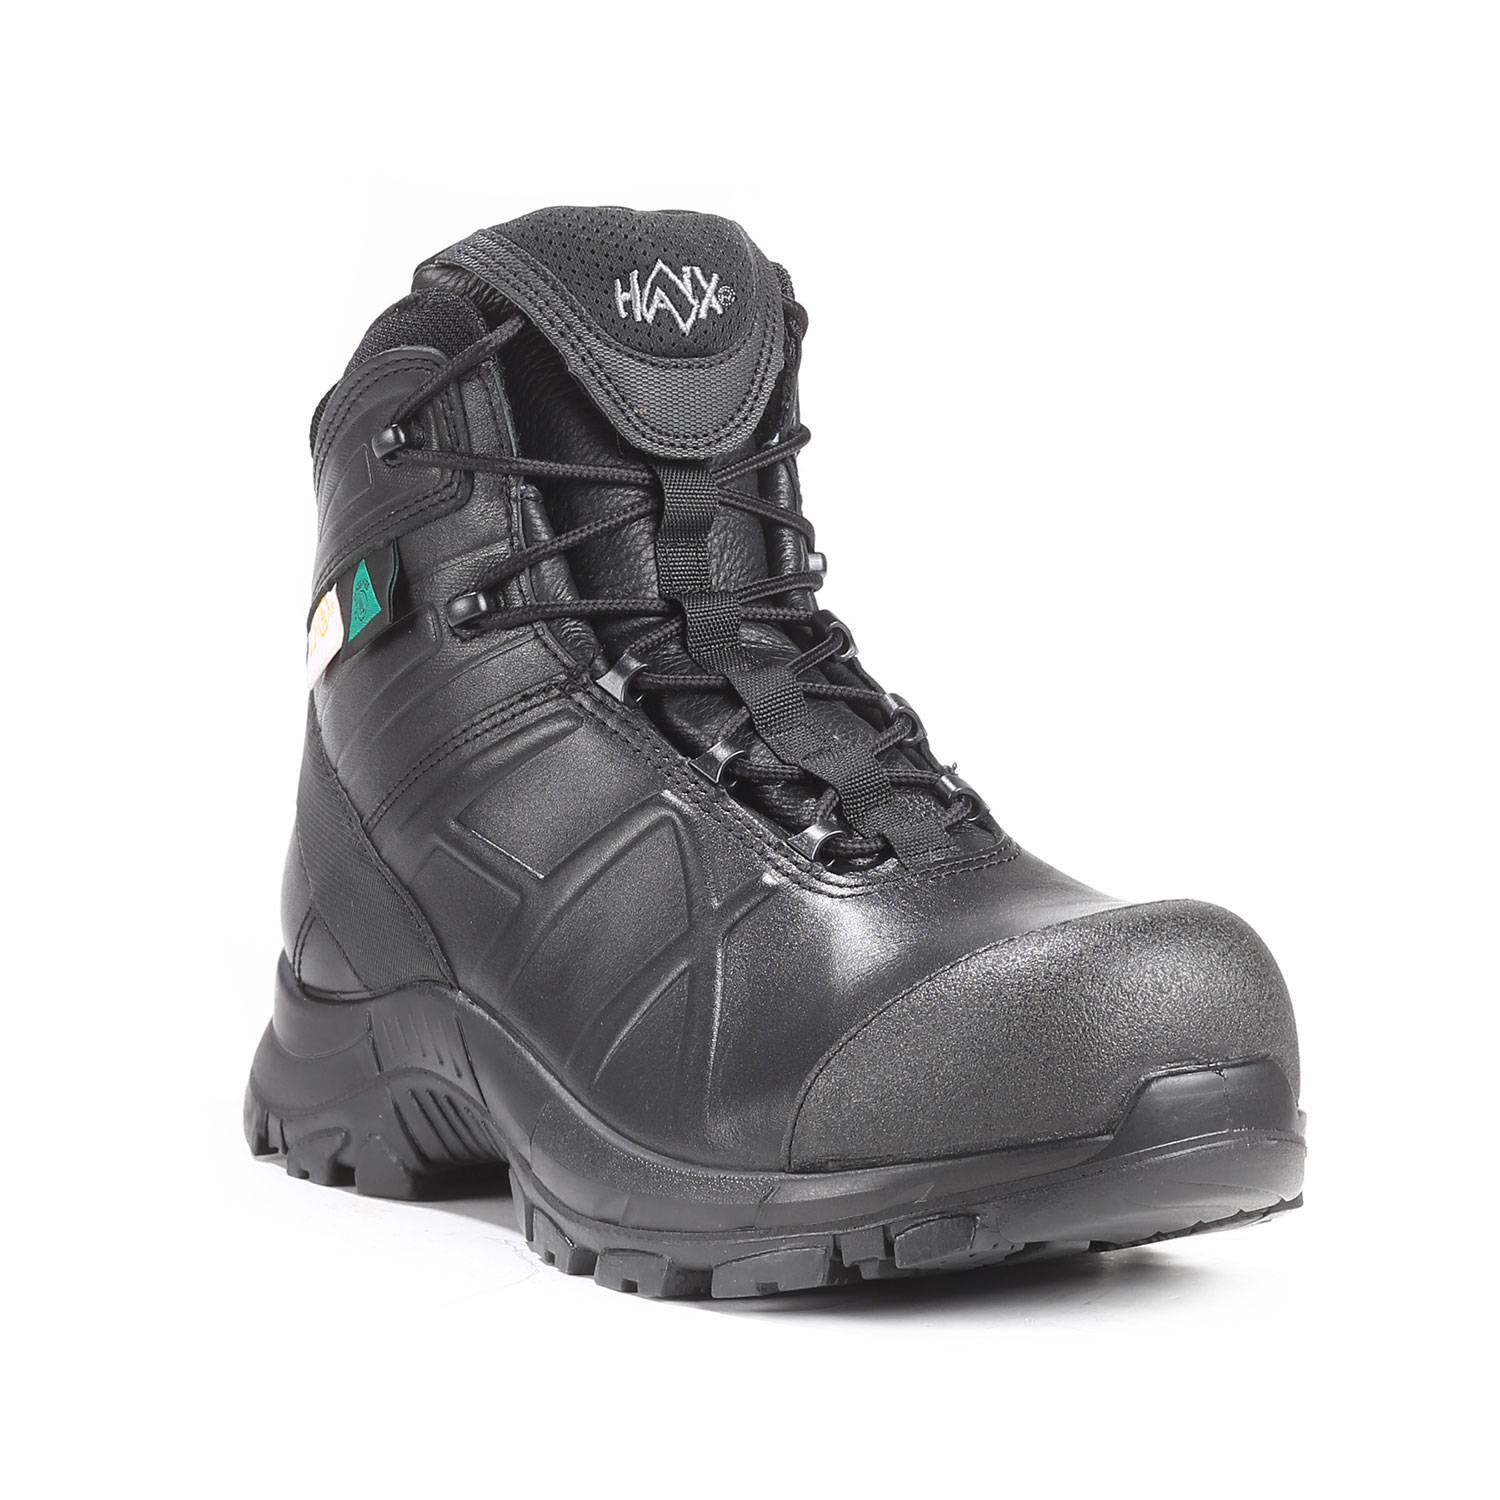 haix safety boots